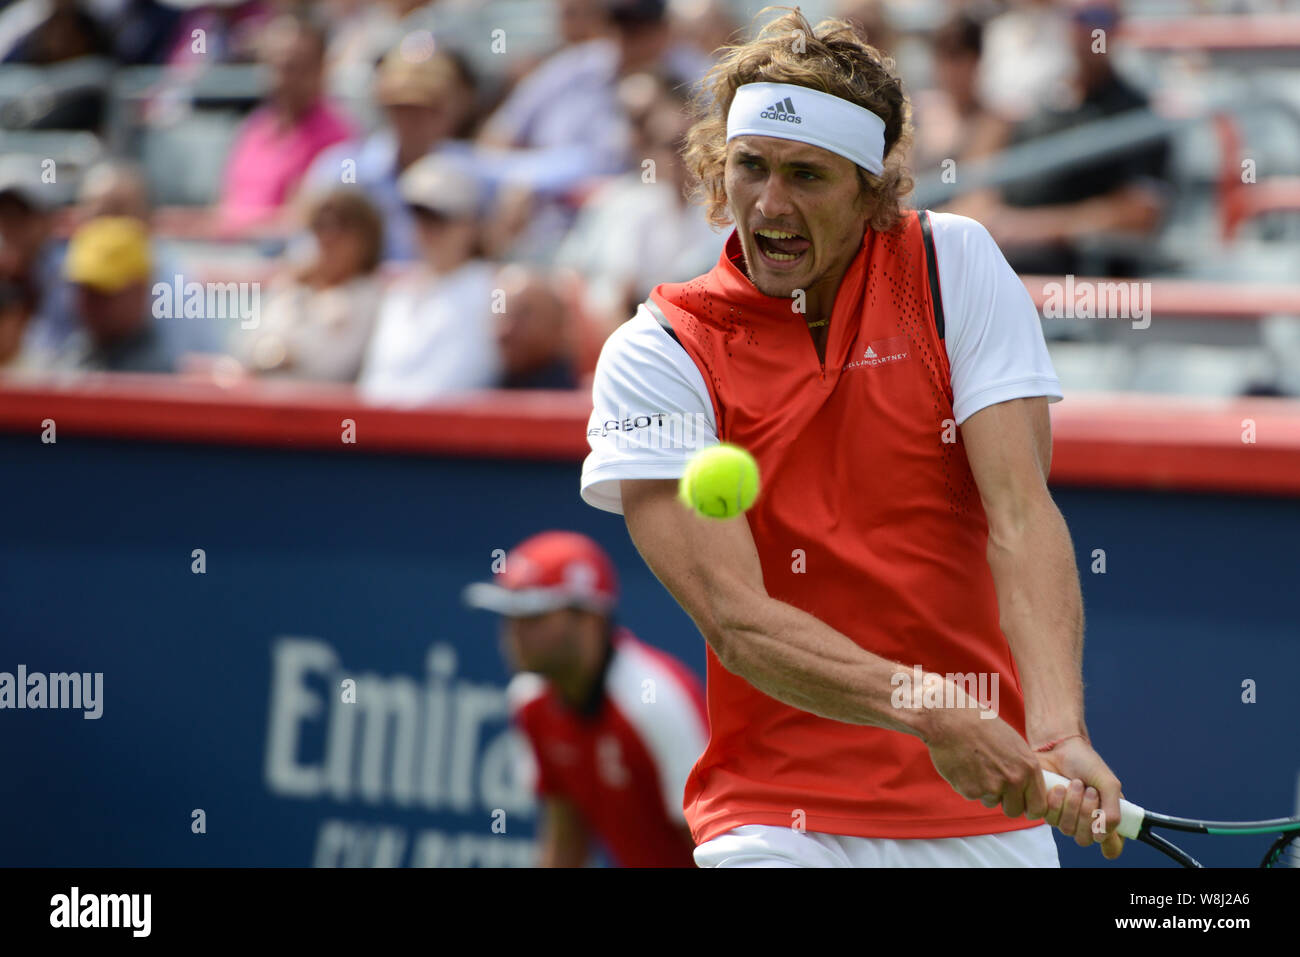 Montreal, Quebec, Canada. 9th Aug, 2019. ALEXANDER ZVEREV of Germany in his  quaterfinal round match v. K. Khachanov in the Rogers Cup tennis tournament  in Montreal Canada. Credit: Christopher Levy/ZUMA Wire/Alamy Live